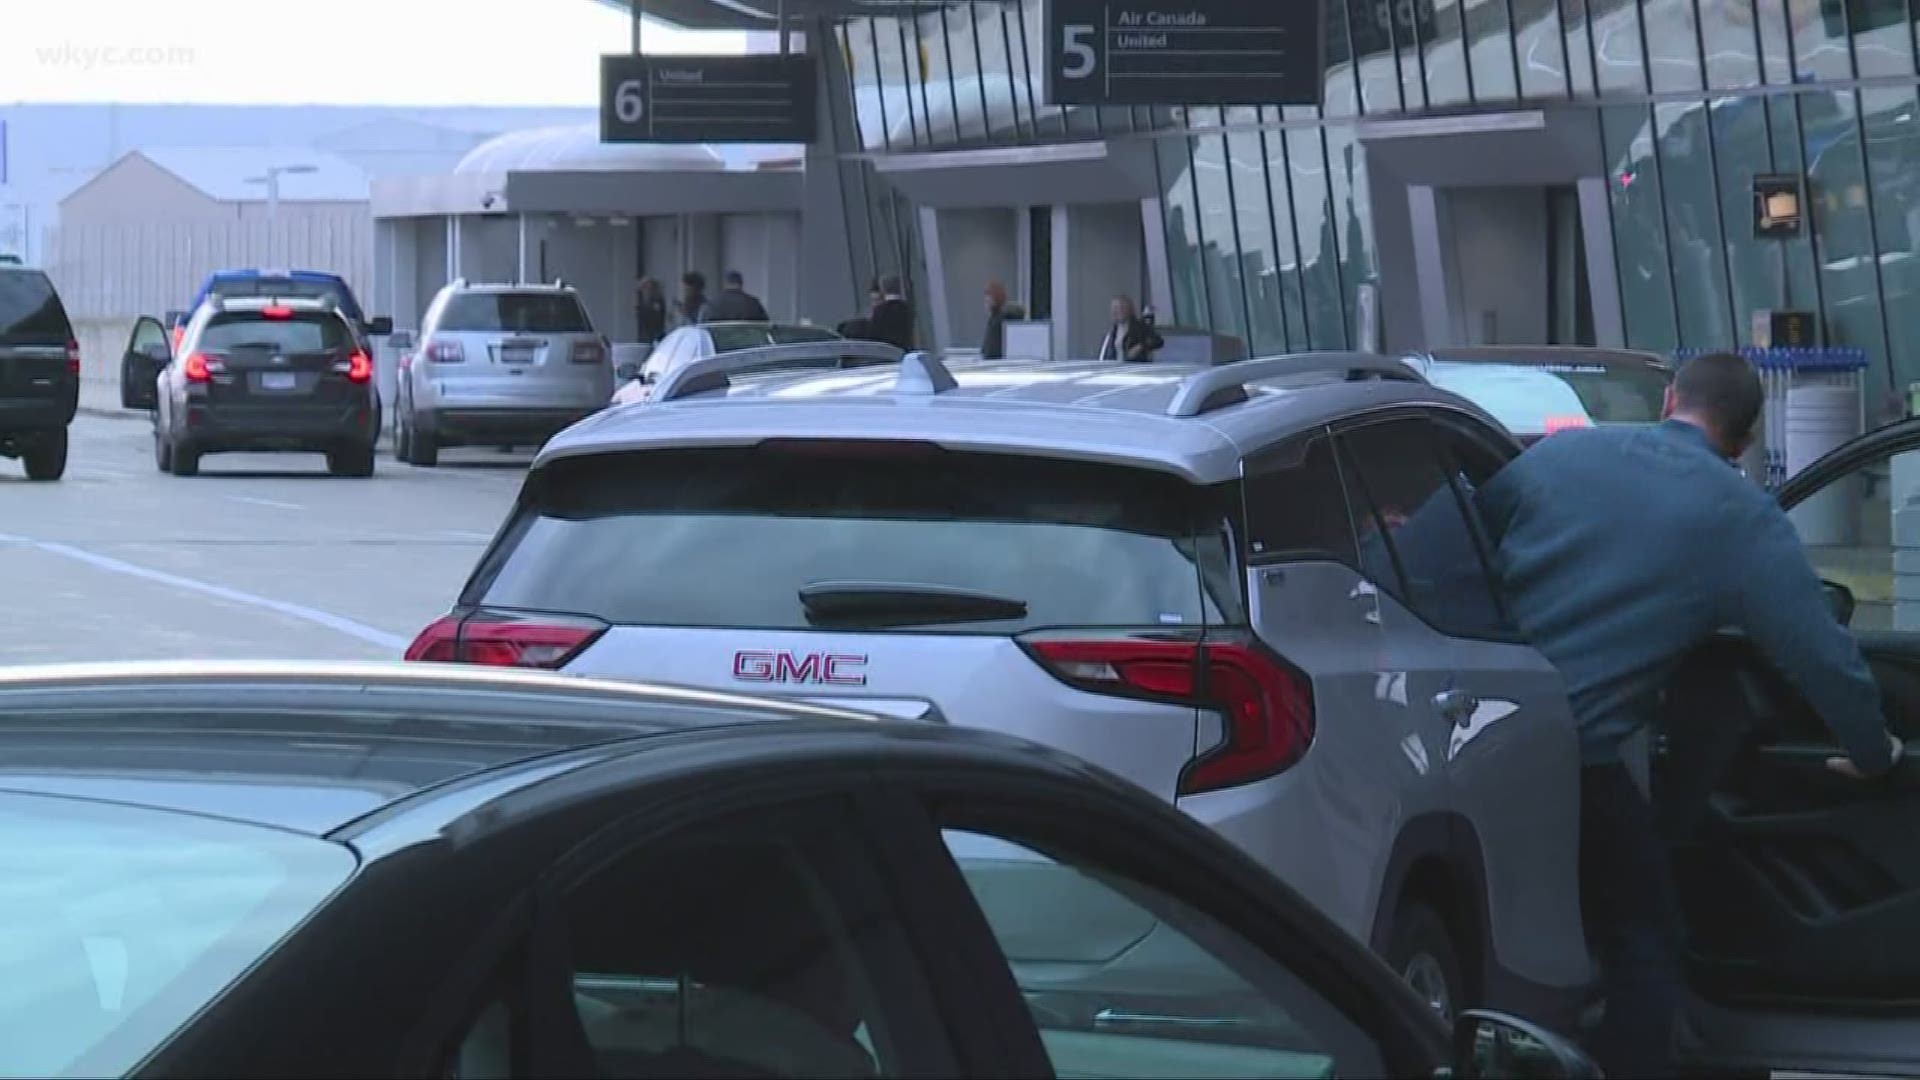 Traveling has become synonymous with the Thanksgiving holiday. Cleveland Hopkins Airport says they are prepared to best serve their customers.